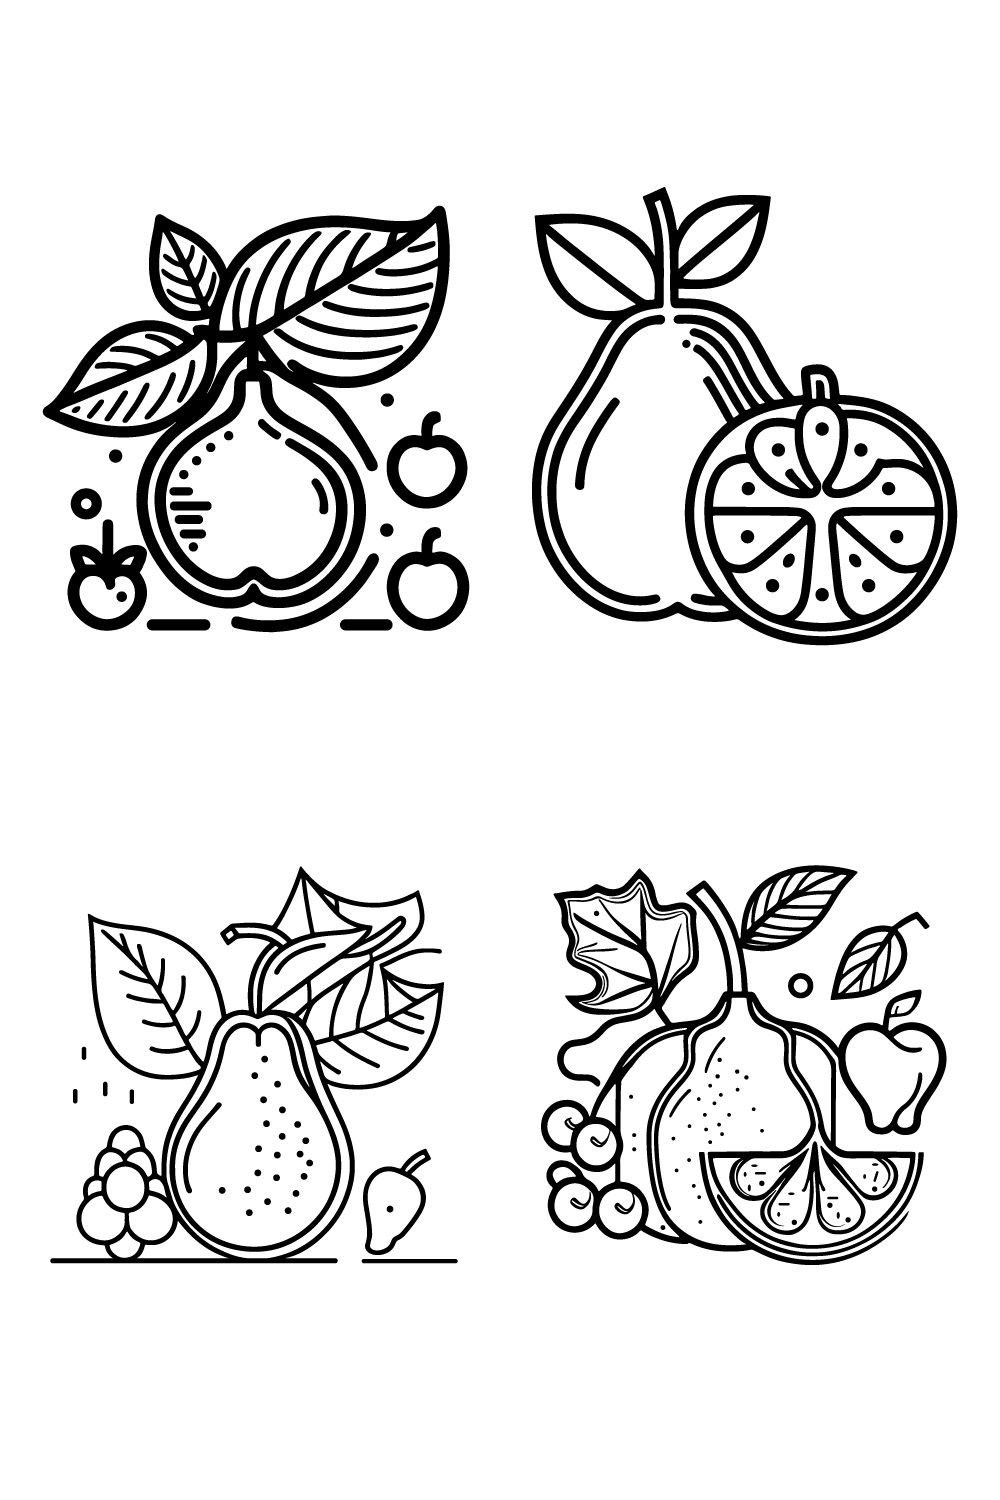 Fruit Icon set, cartoon fruits isolated on white background, Simple line art outline elements collection, clean simple design pinterest preview image.